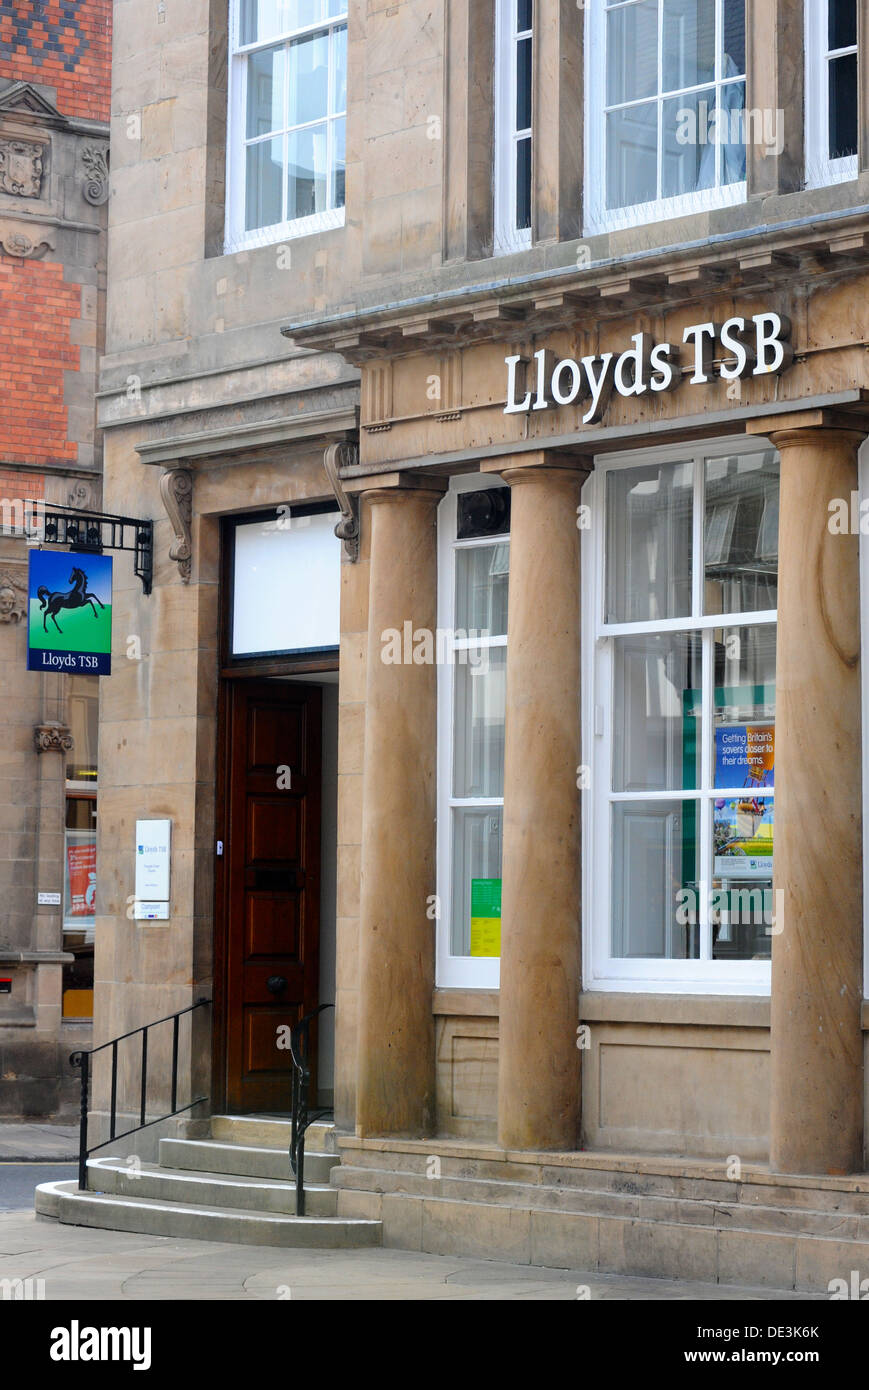 A Lloyds TSB bank in Chester. Stock Photo